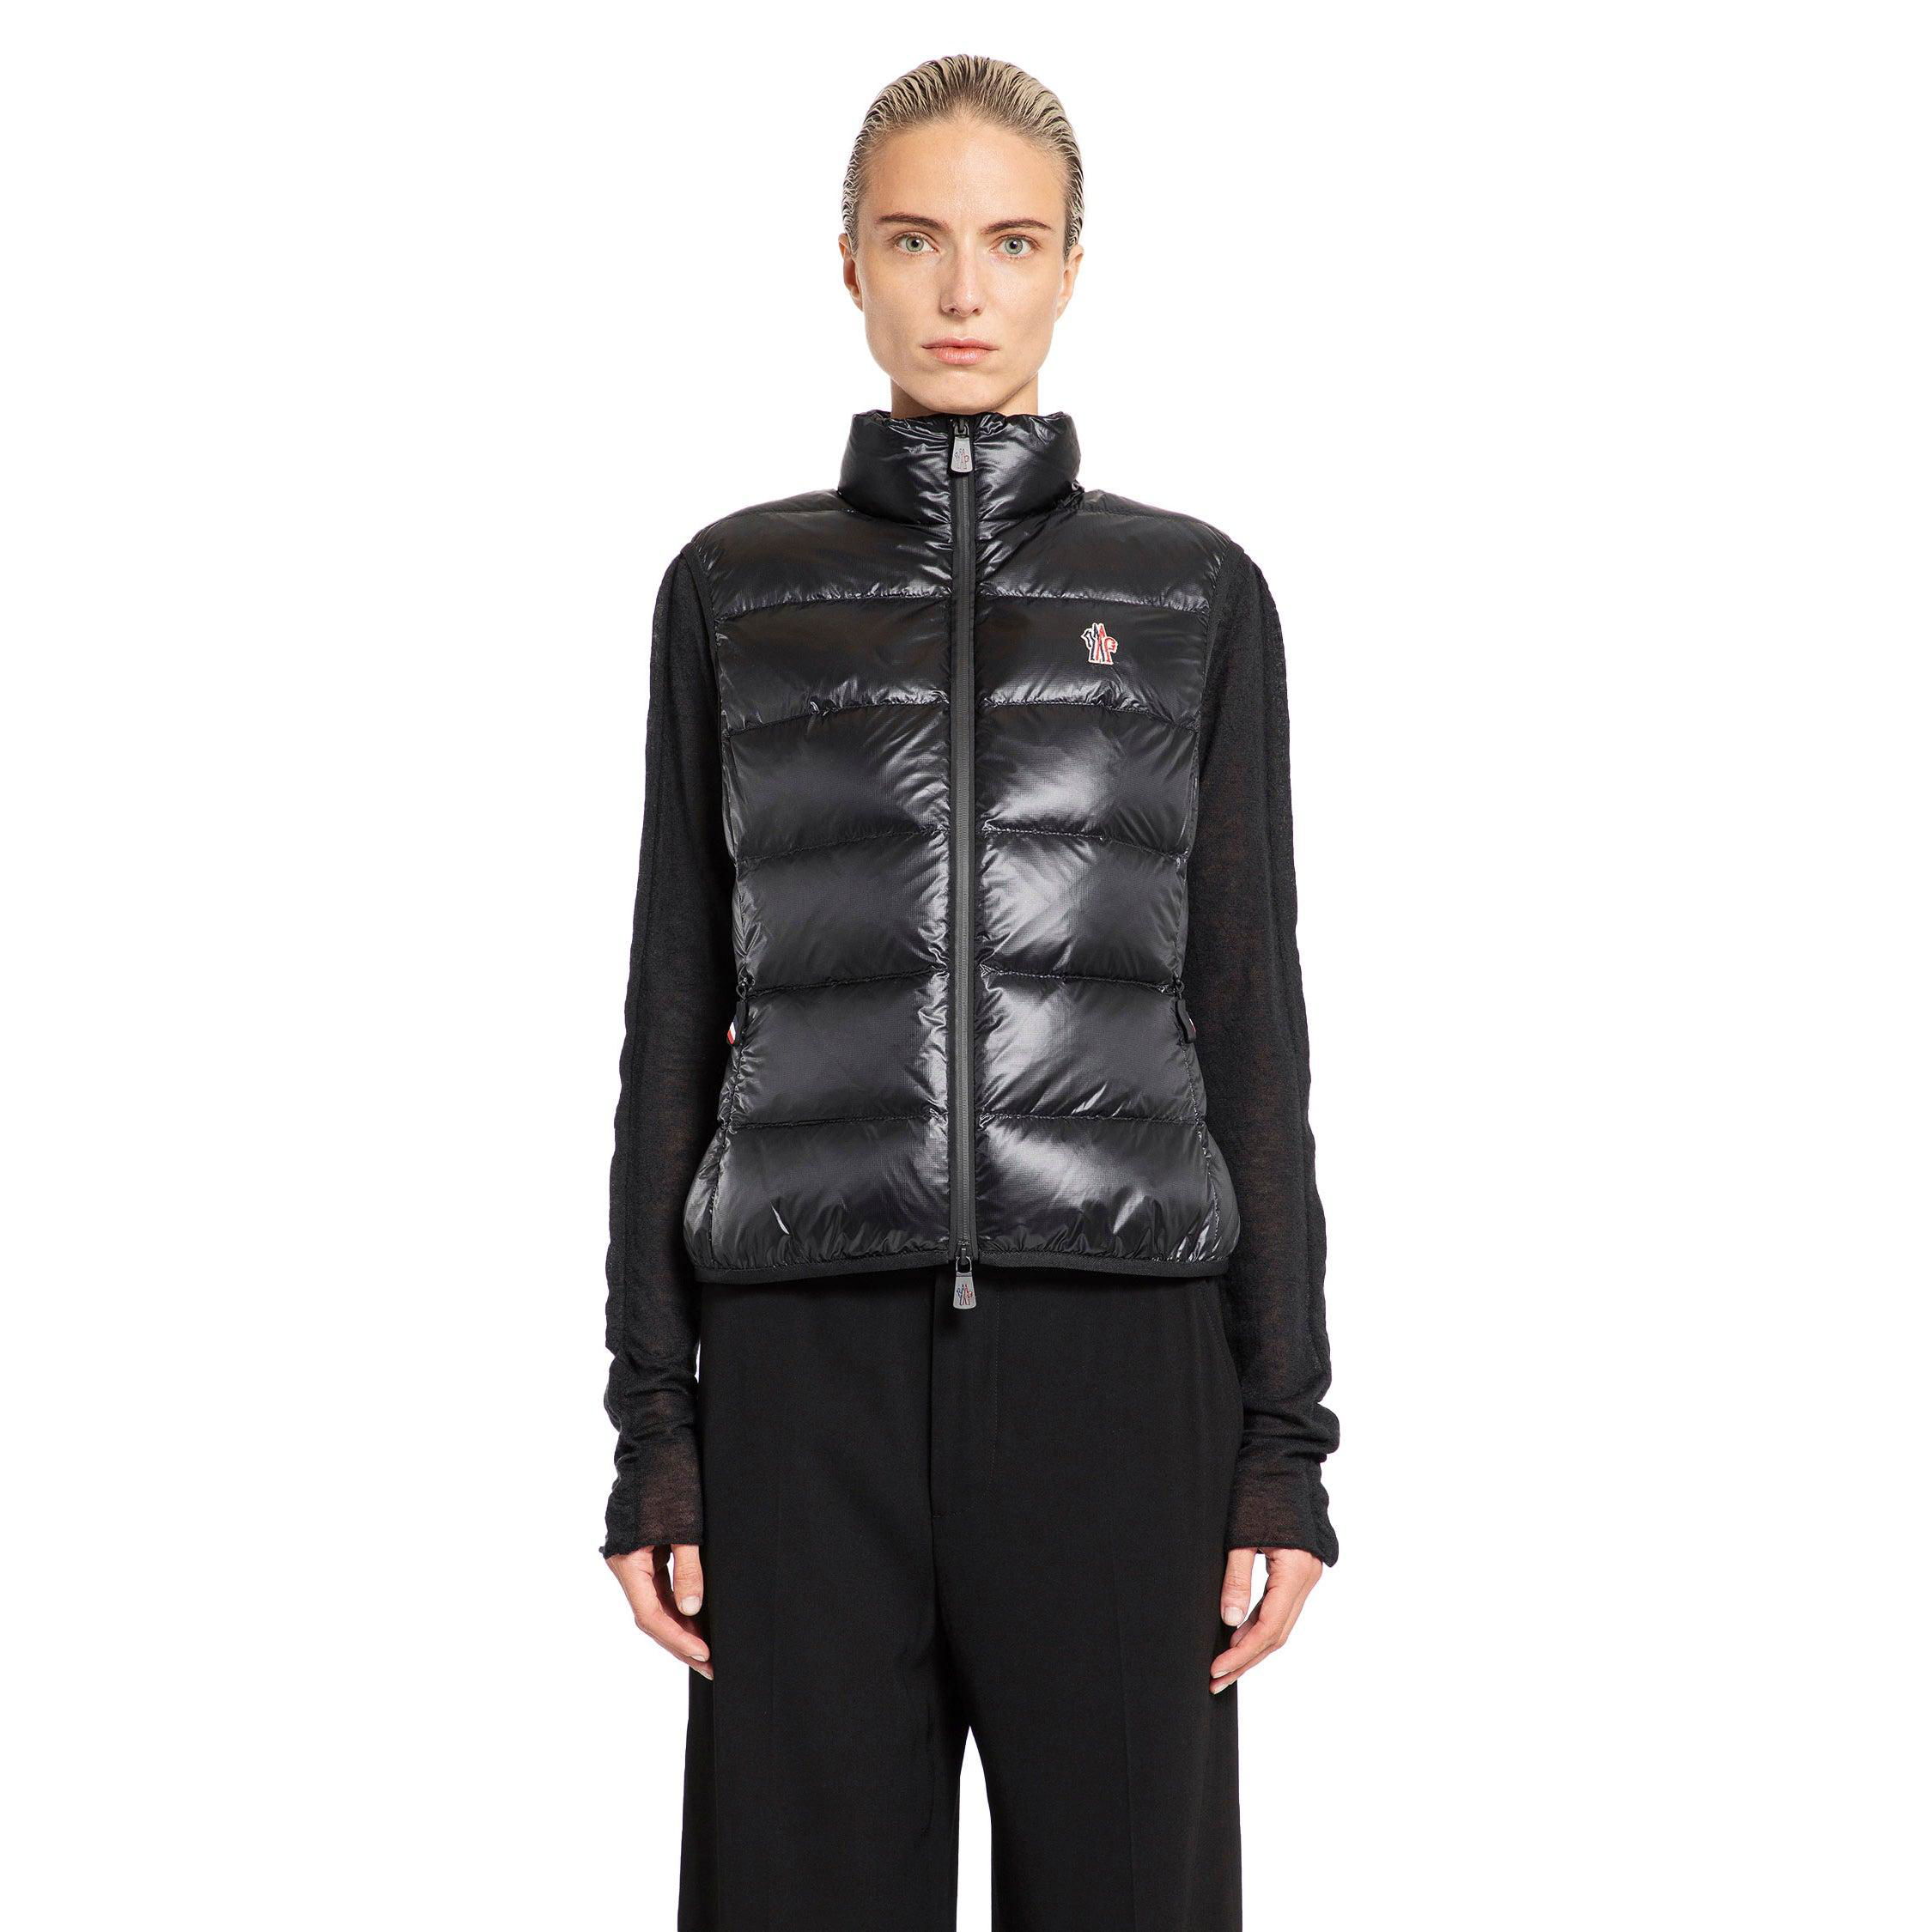 MONCLER GRENOBLE WOMAN BLACK JACKETS by MONCLER